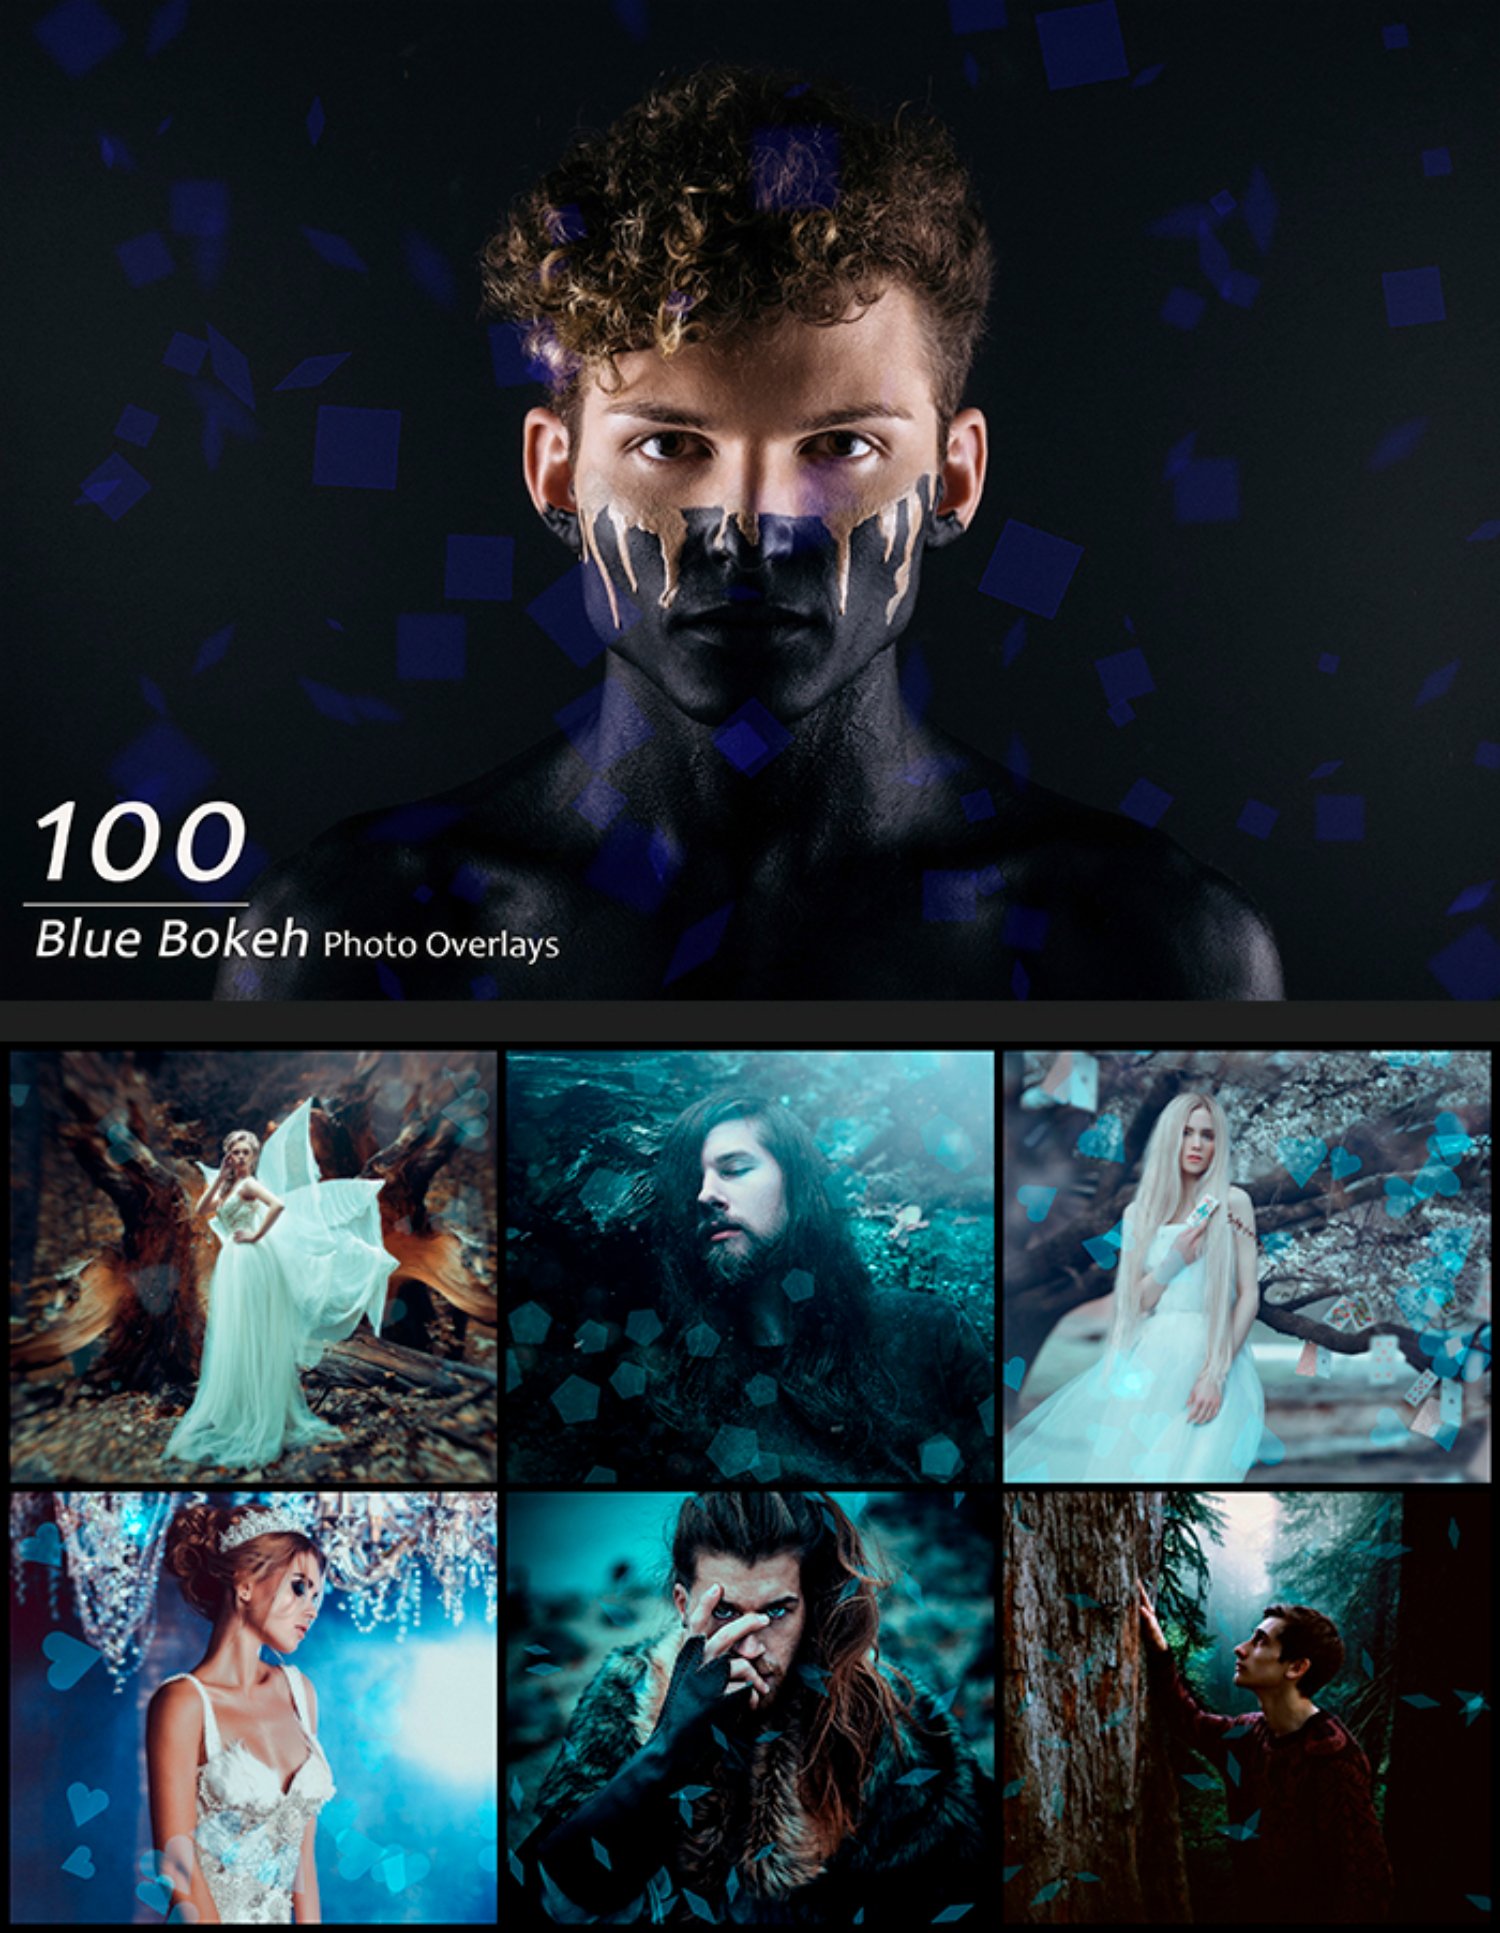 100 Blue Bokeh Photo Overlayscover image.